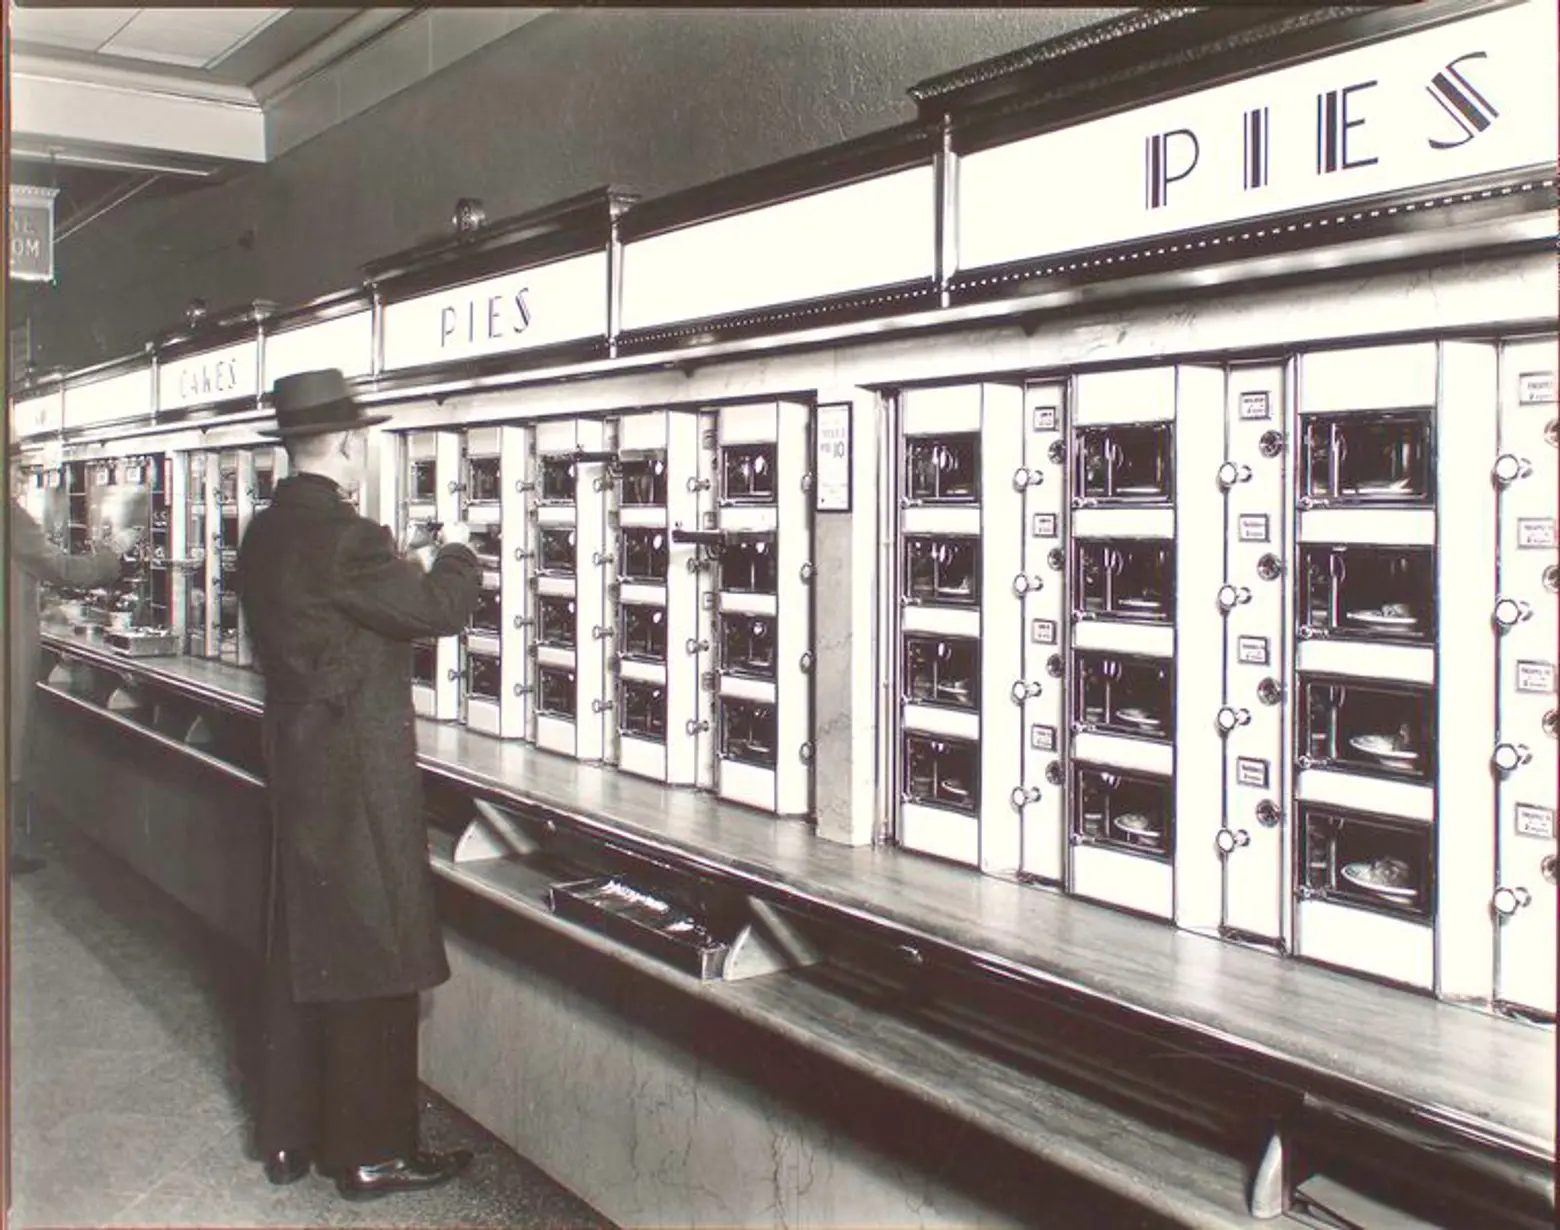 Horn & Hardart Automats: Redefining lunchtime, dining on a dime